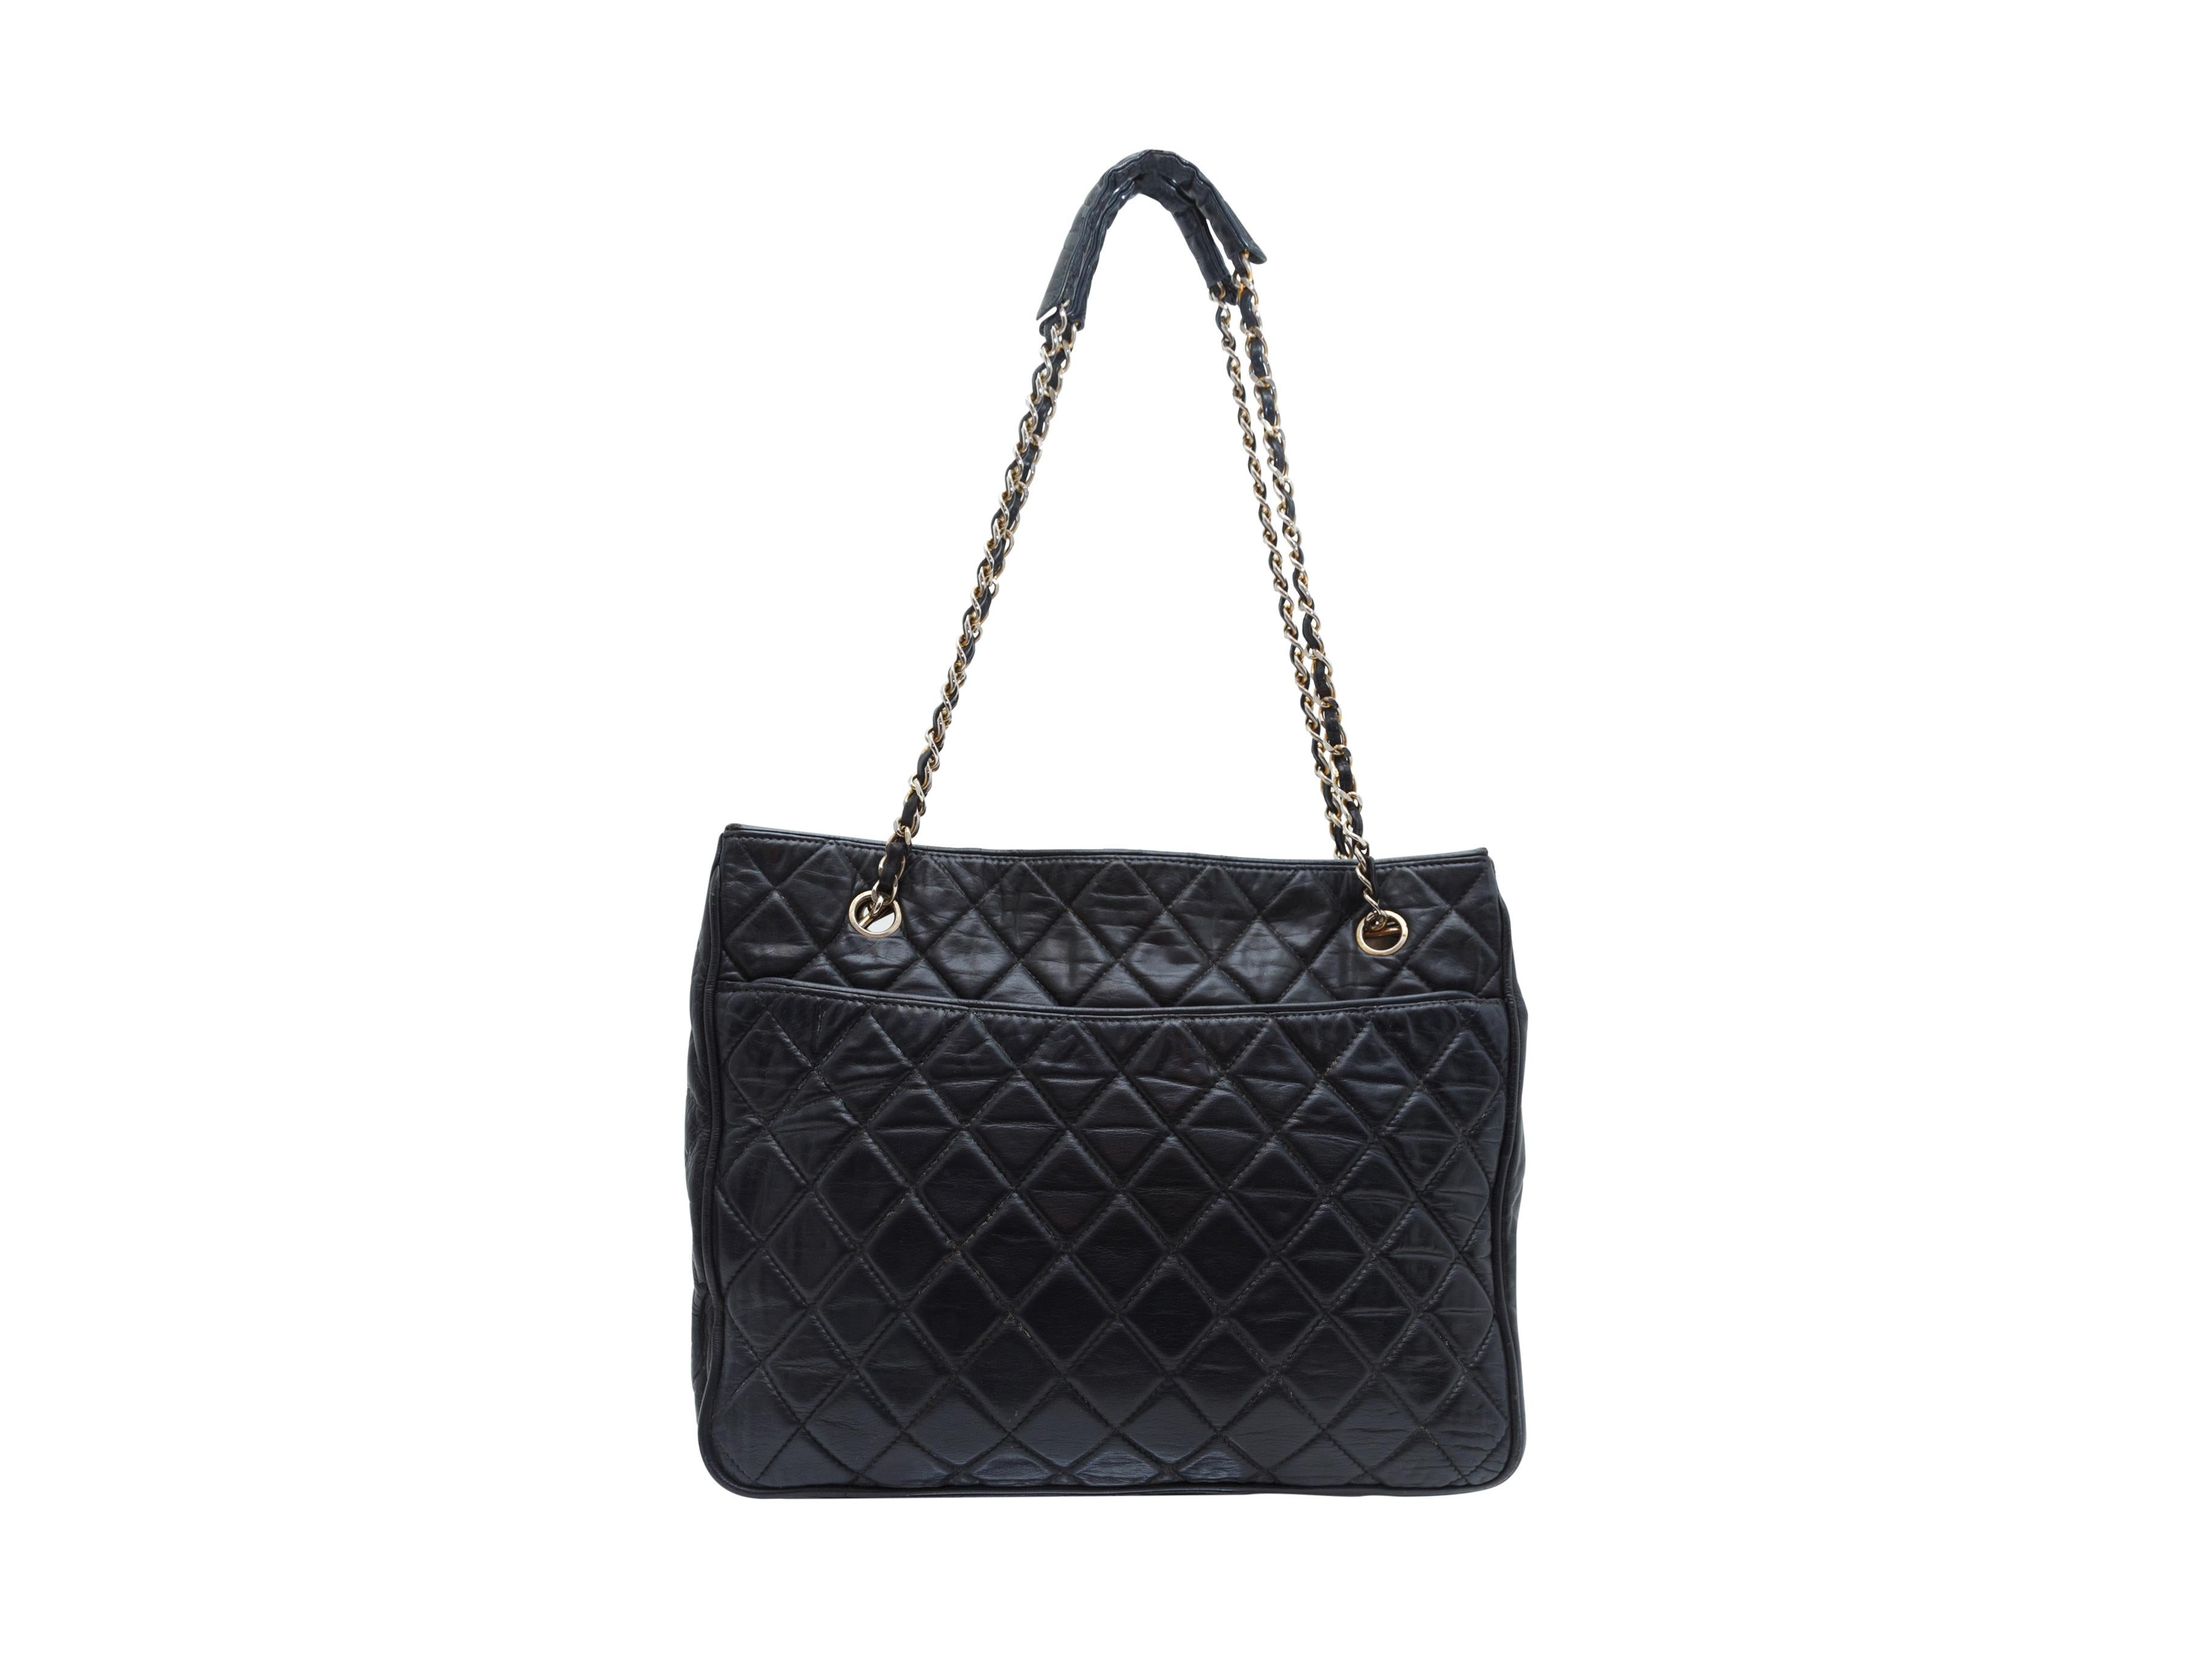 Women's Chanel Black Classic Quilted Tote Bag